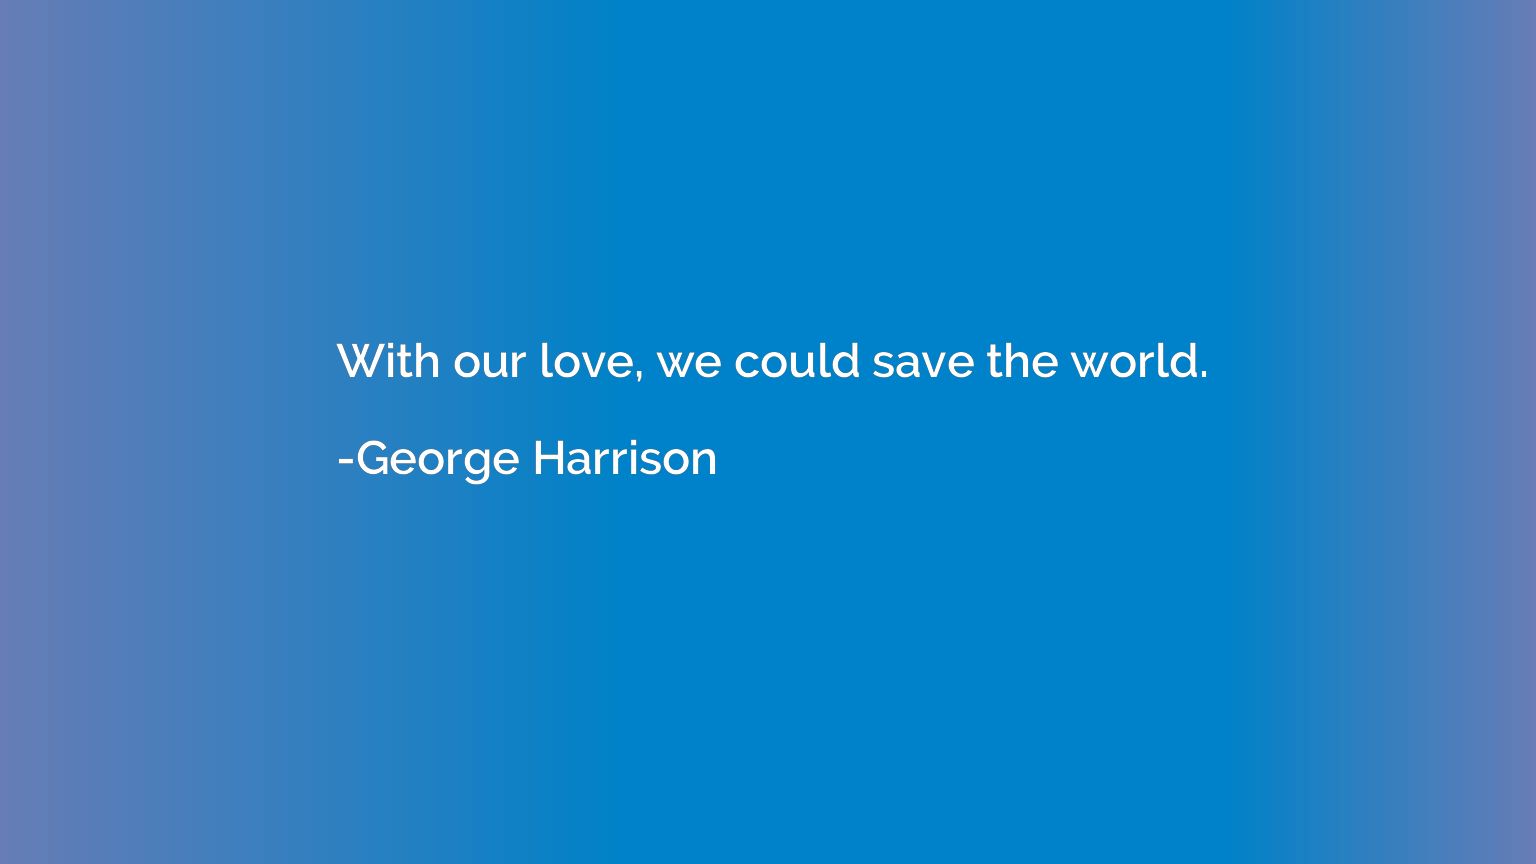 With our love, we could save the world.